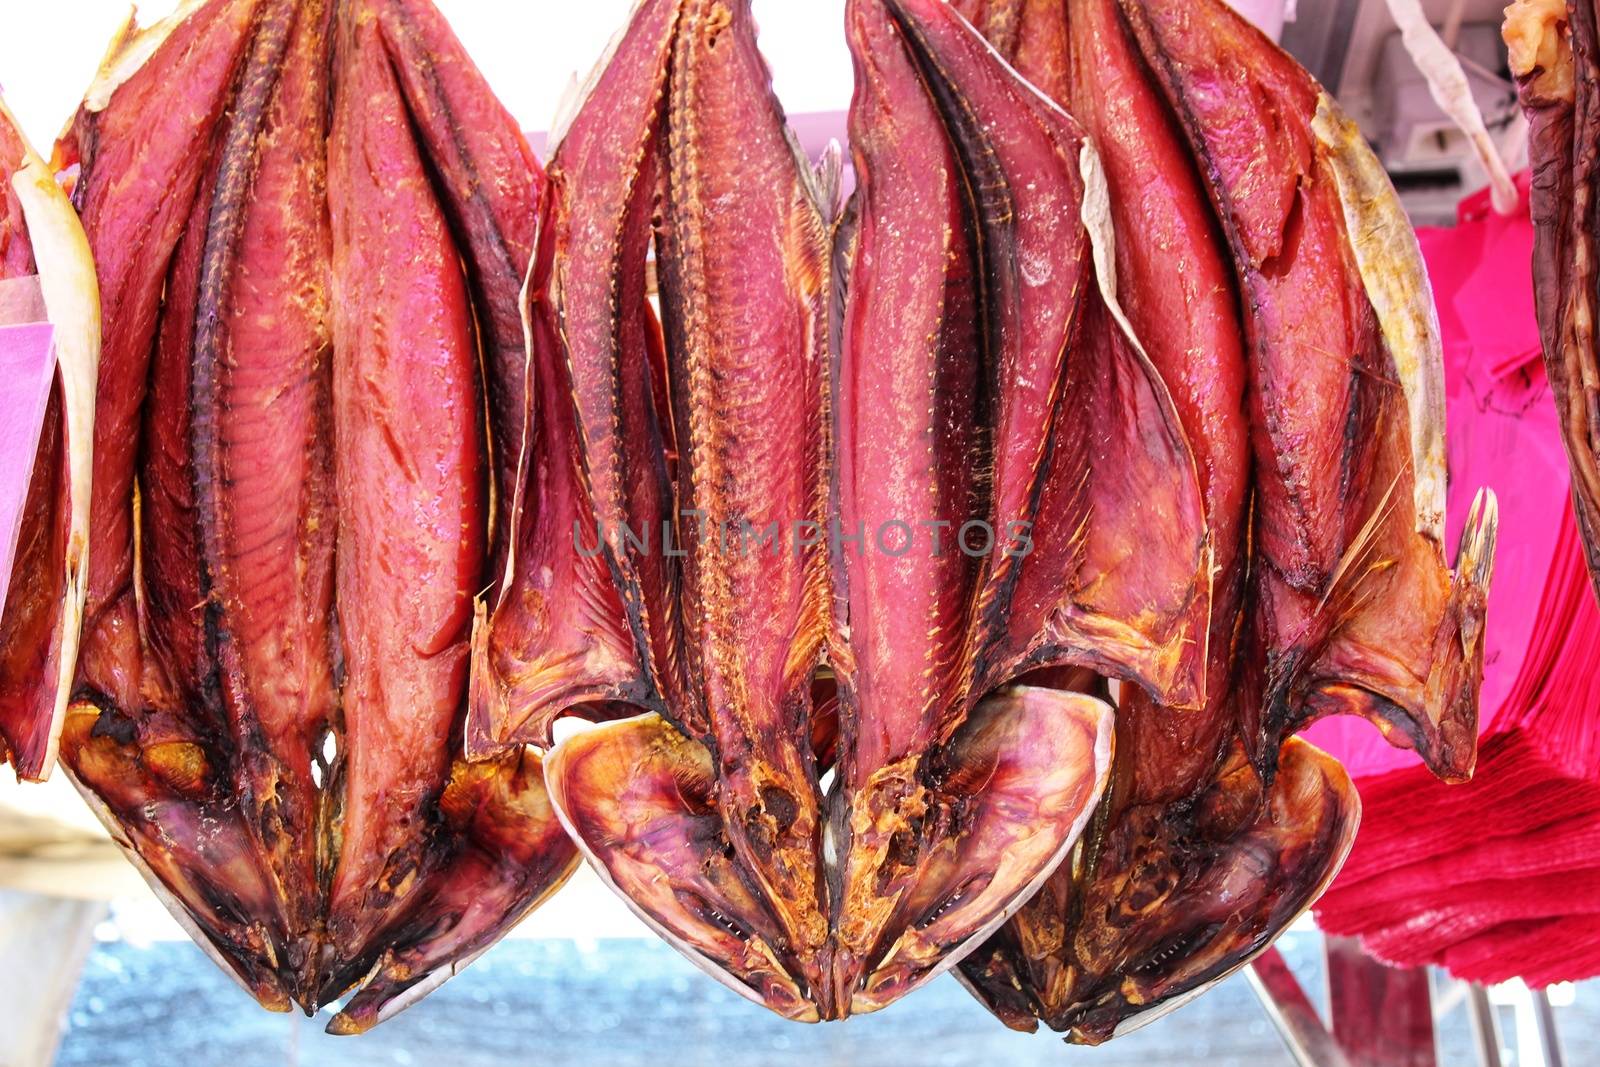 Salted fish products for sale at a market stall  by soniabonet